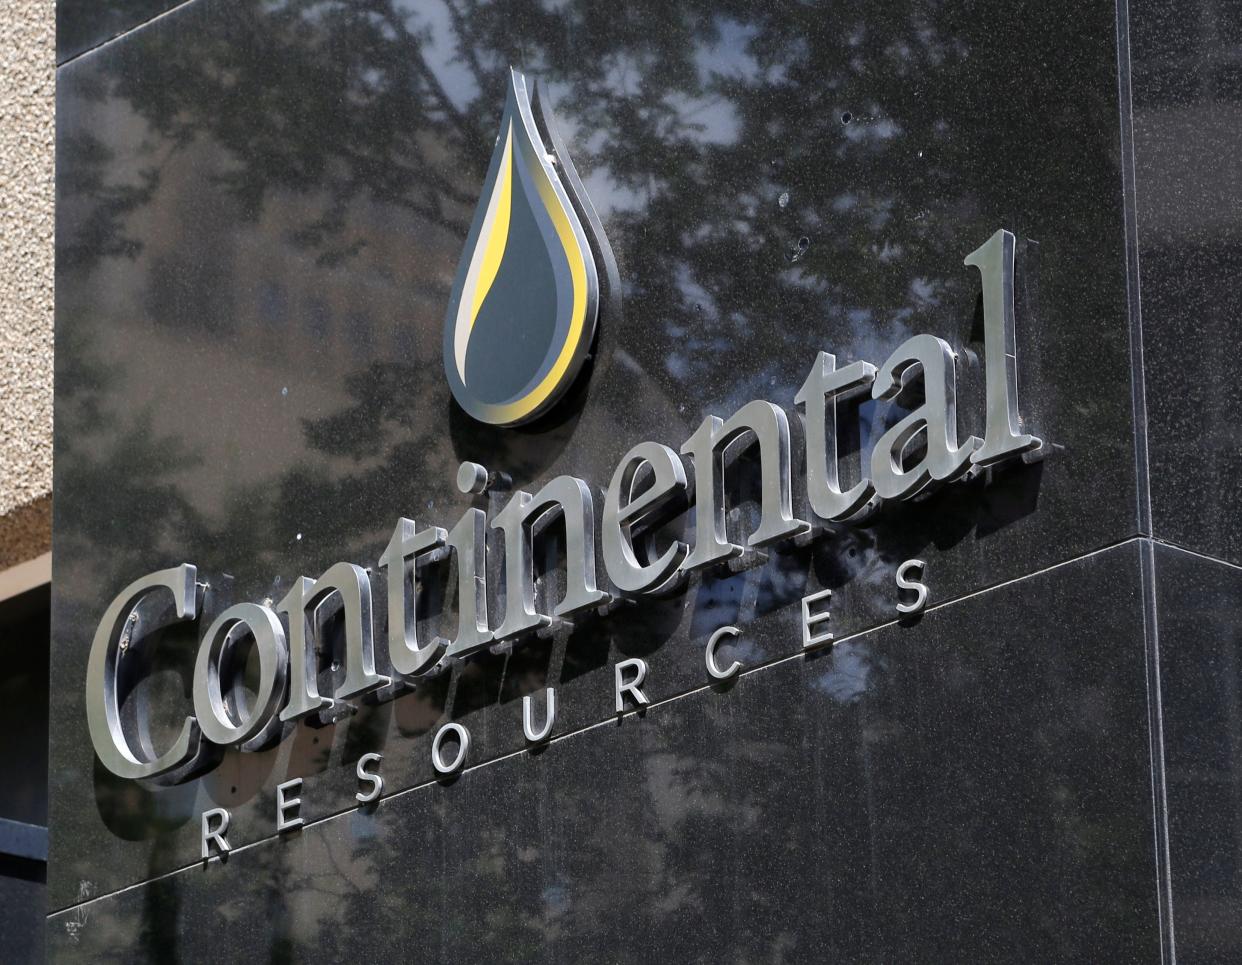 Continental Resources headquarters in downtown Oklahoma City.